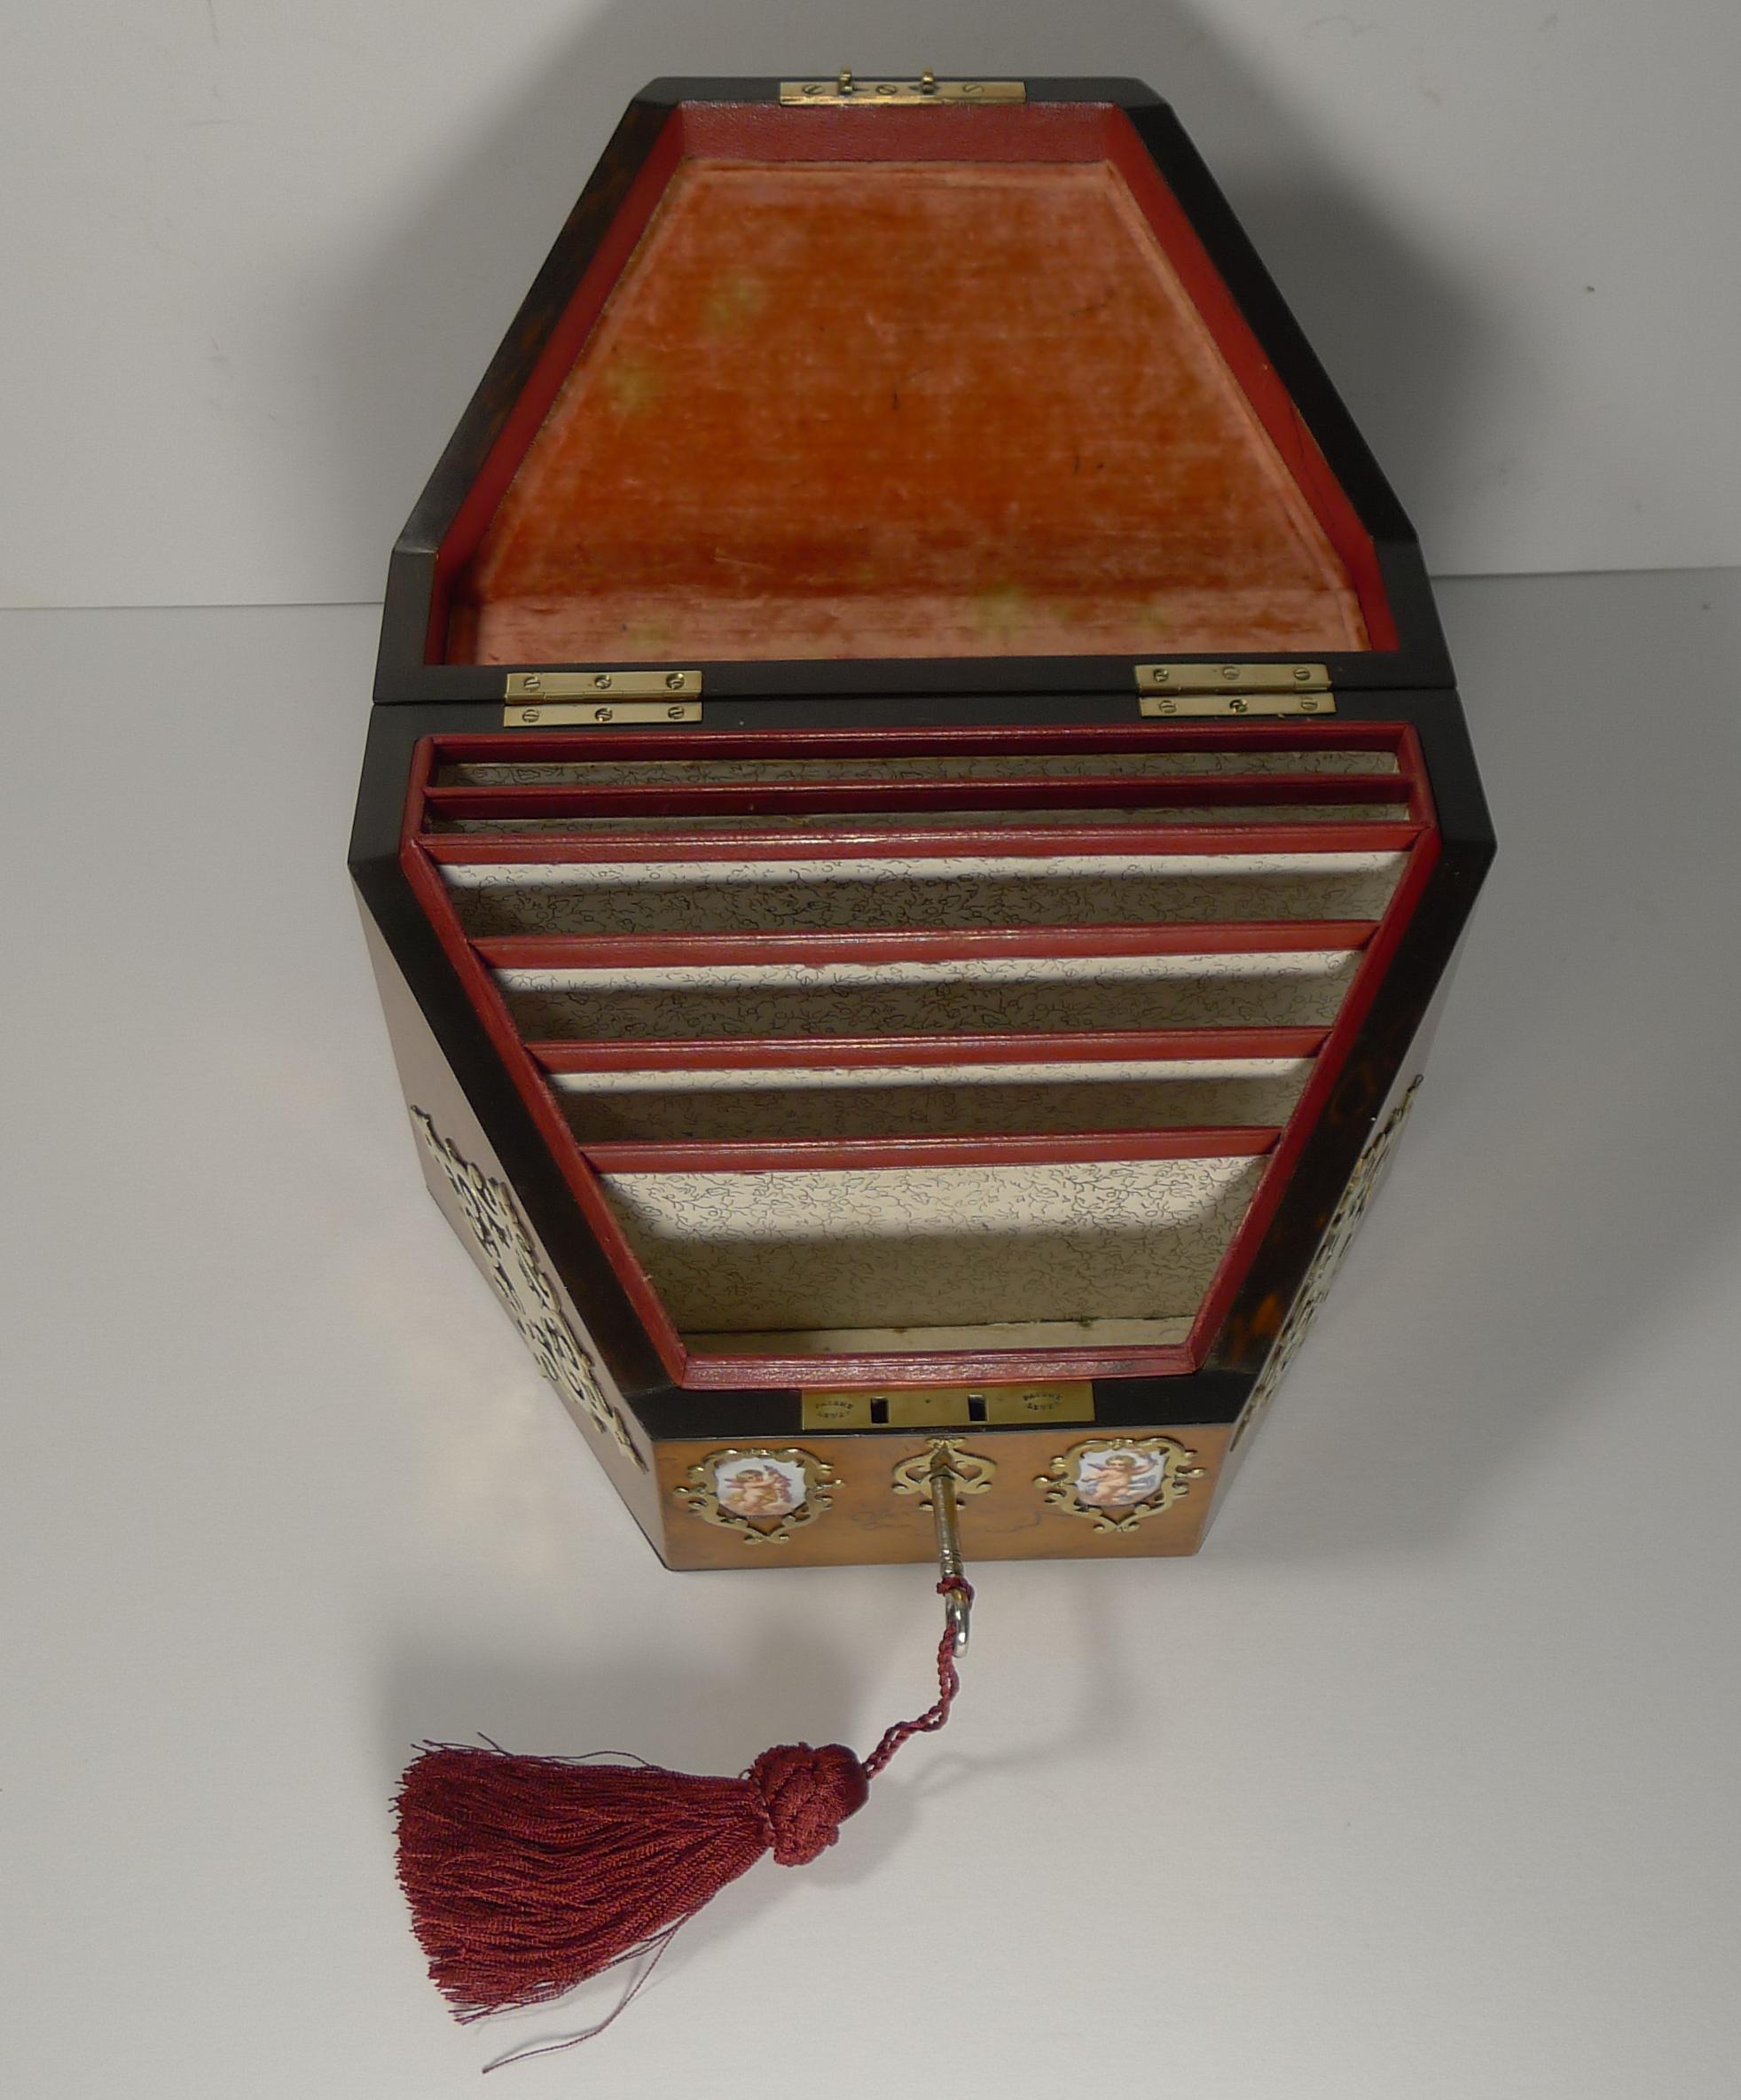 Antique English Burr Walnut & Hand Painted Porcelain Stationery Box, circa 1850 For Sale 2